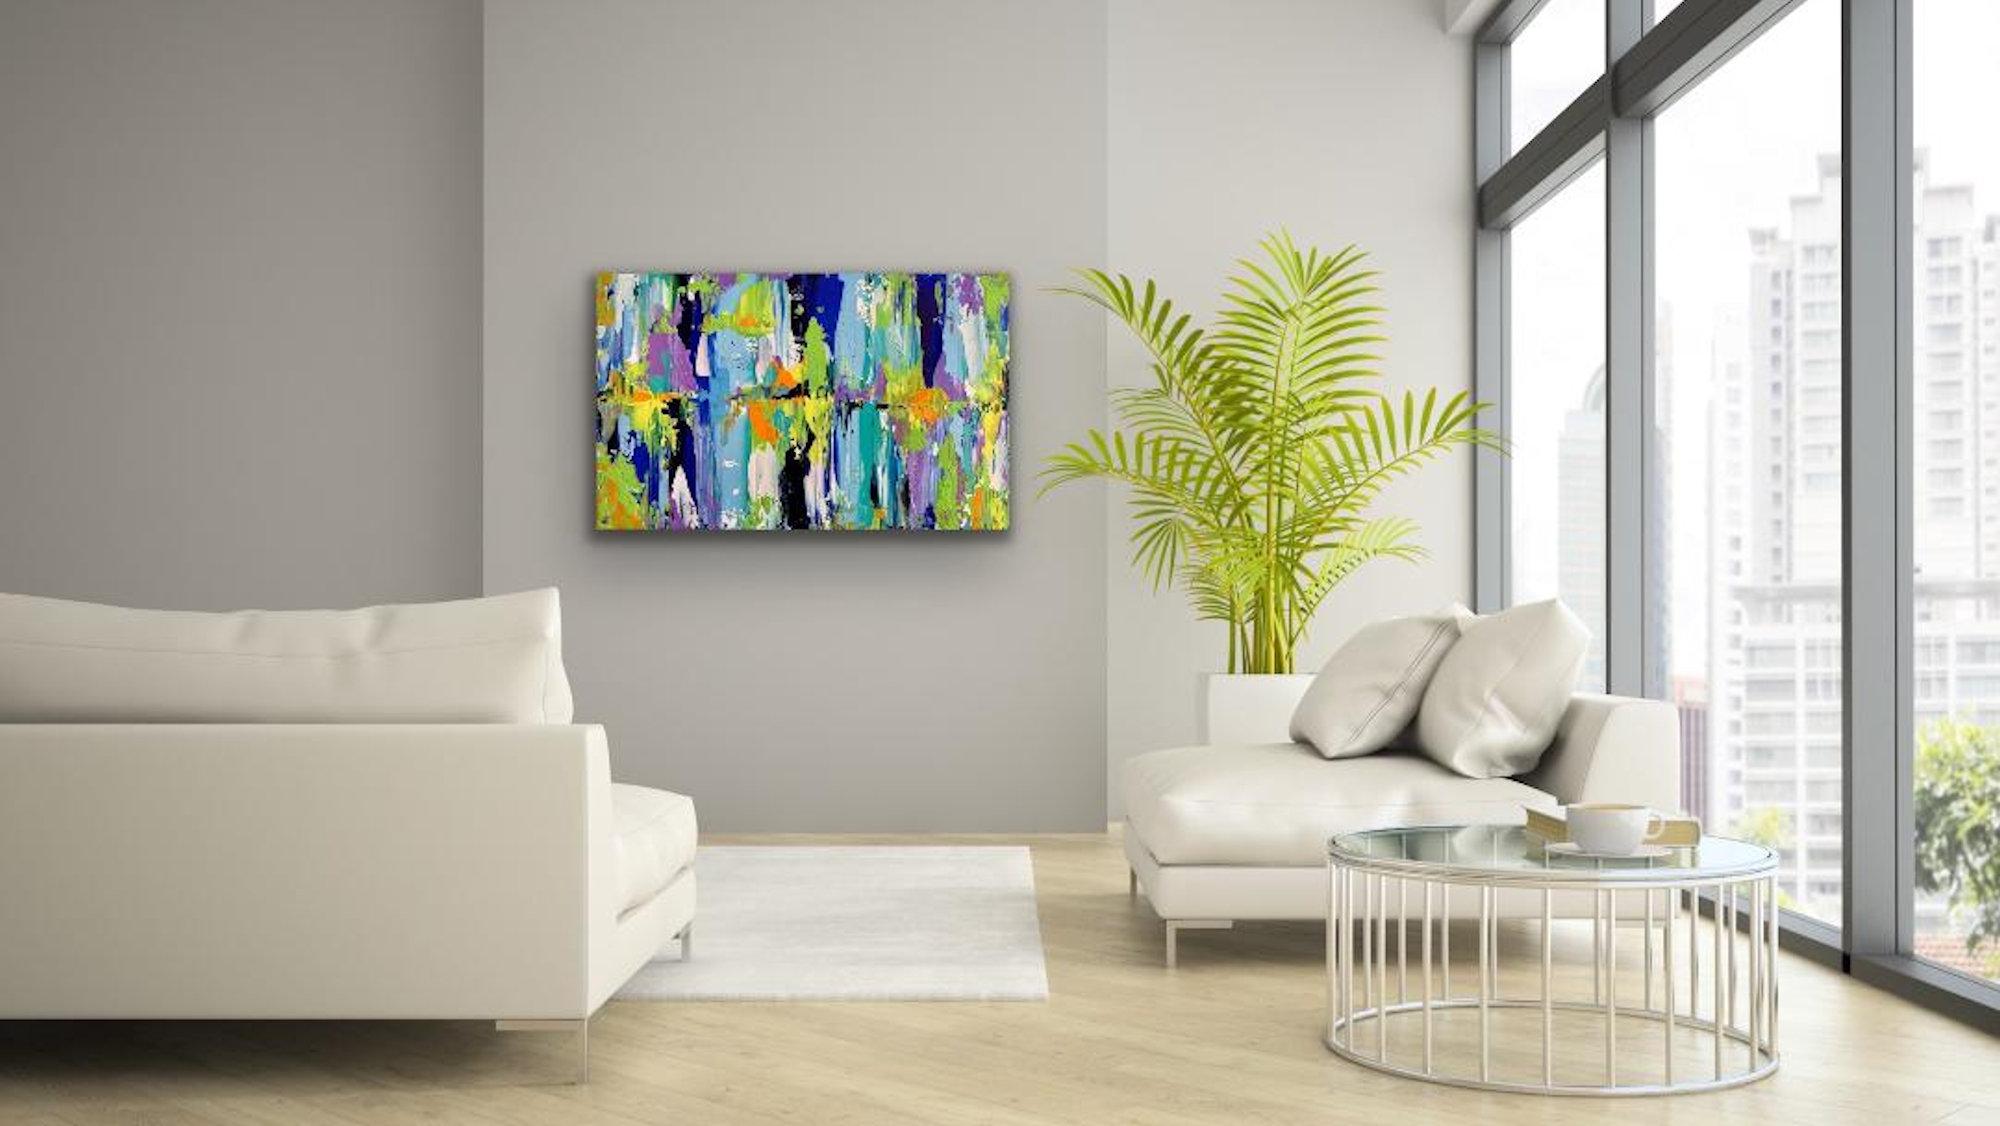 Contemporary Modern Abstract Painting, Giclee Print on Metal, by Cessy  For Sale 4